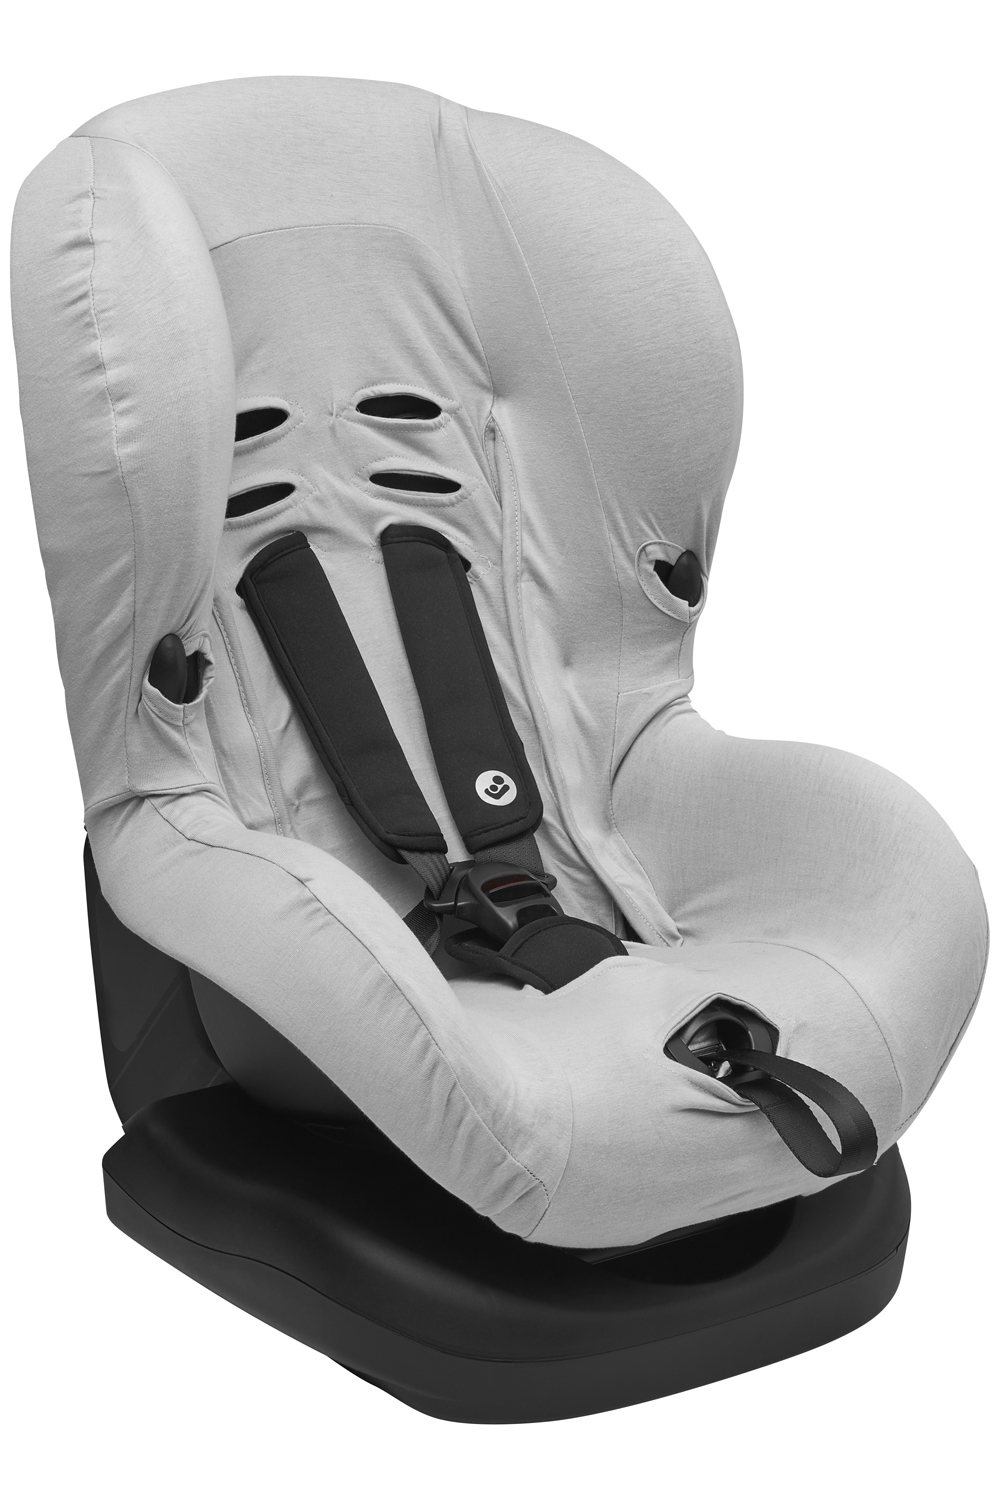 Car Seat Cover Basic Jersey - Light Grey - Group 1